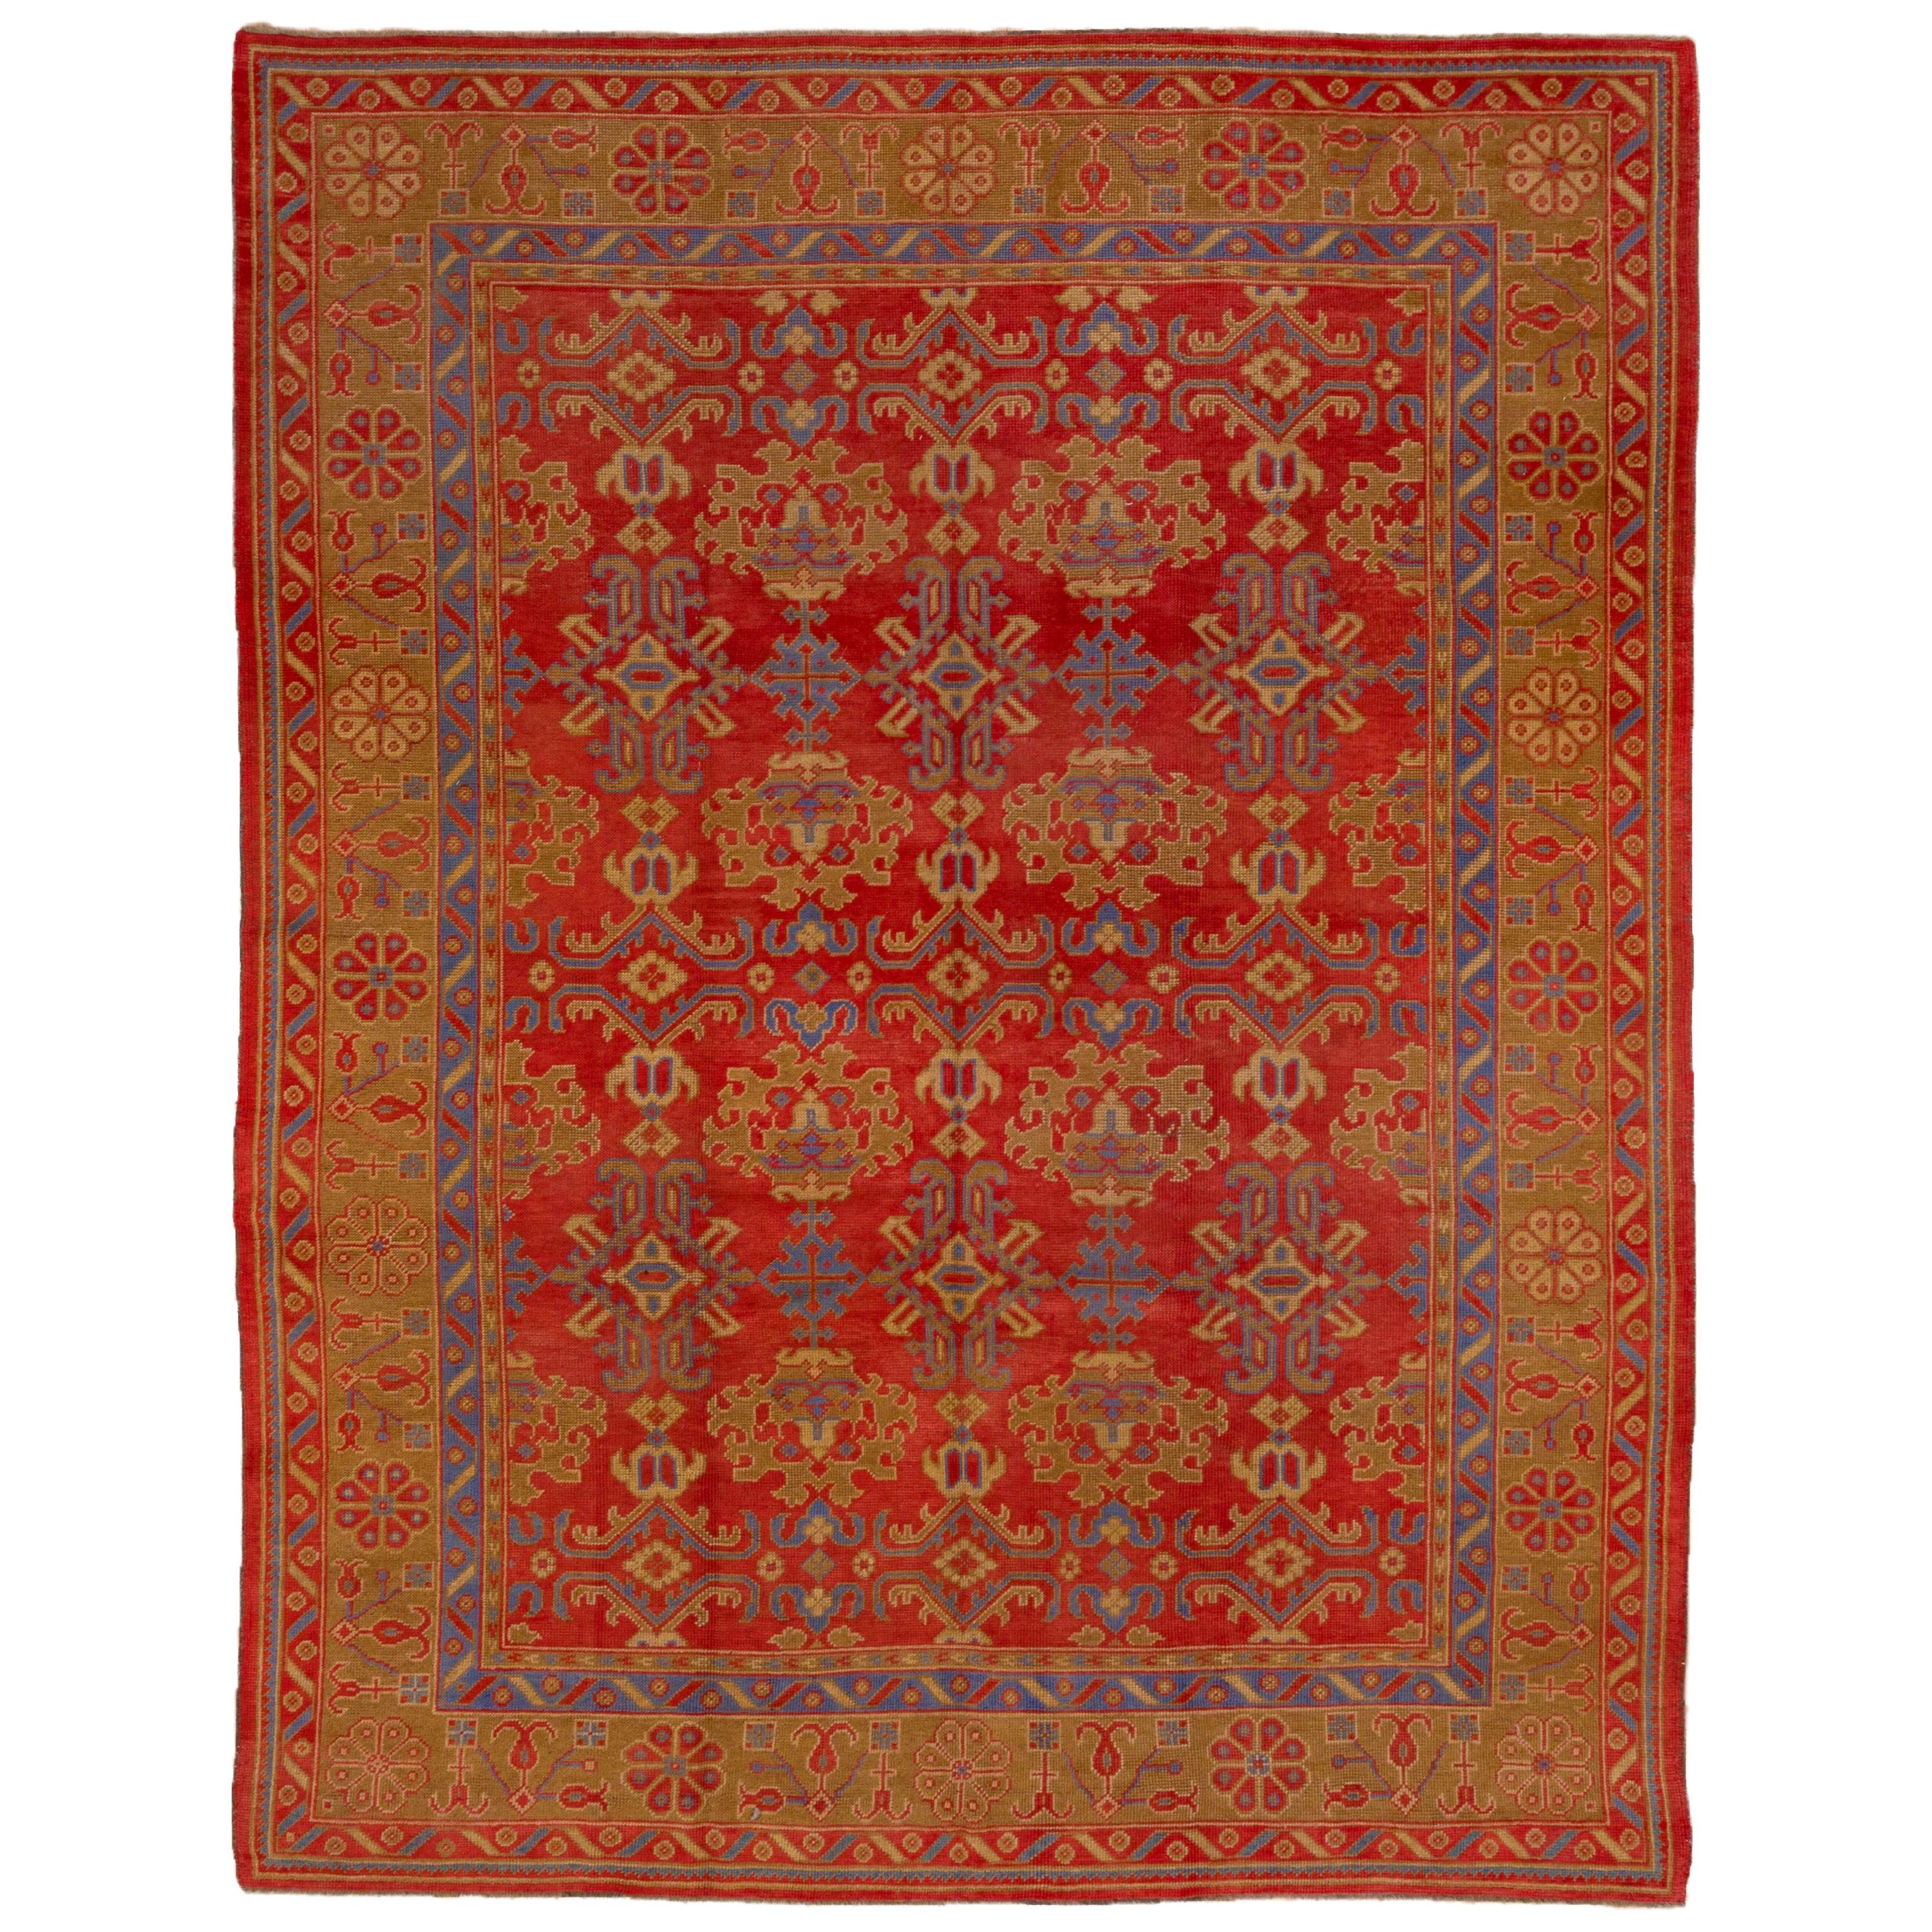 Colorful Antique Oushak Rug, Bright Red Field, Multicolored Borders, circa 1930s For Sale